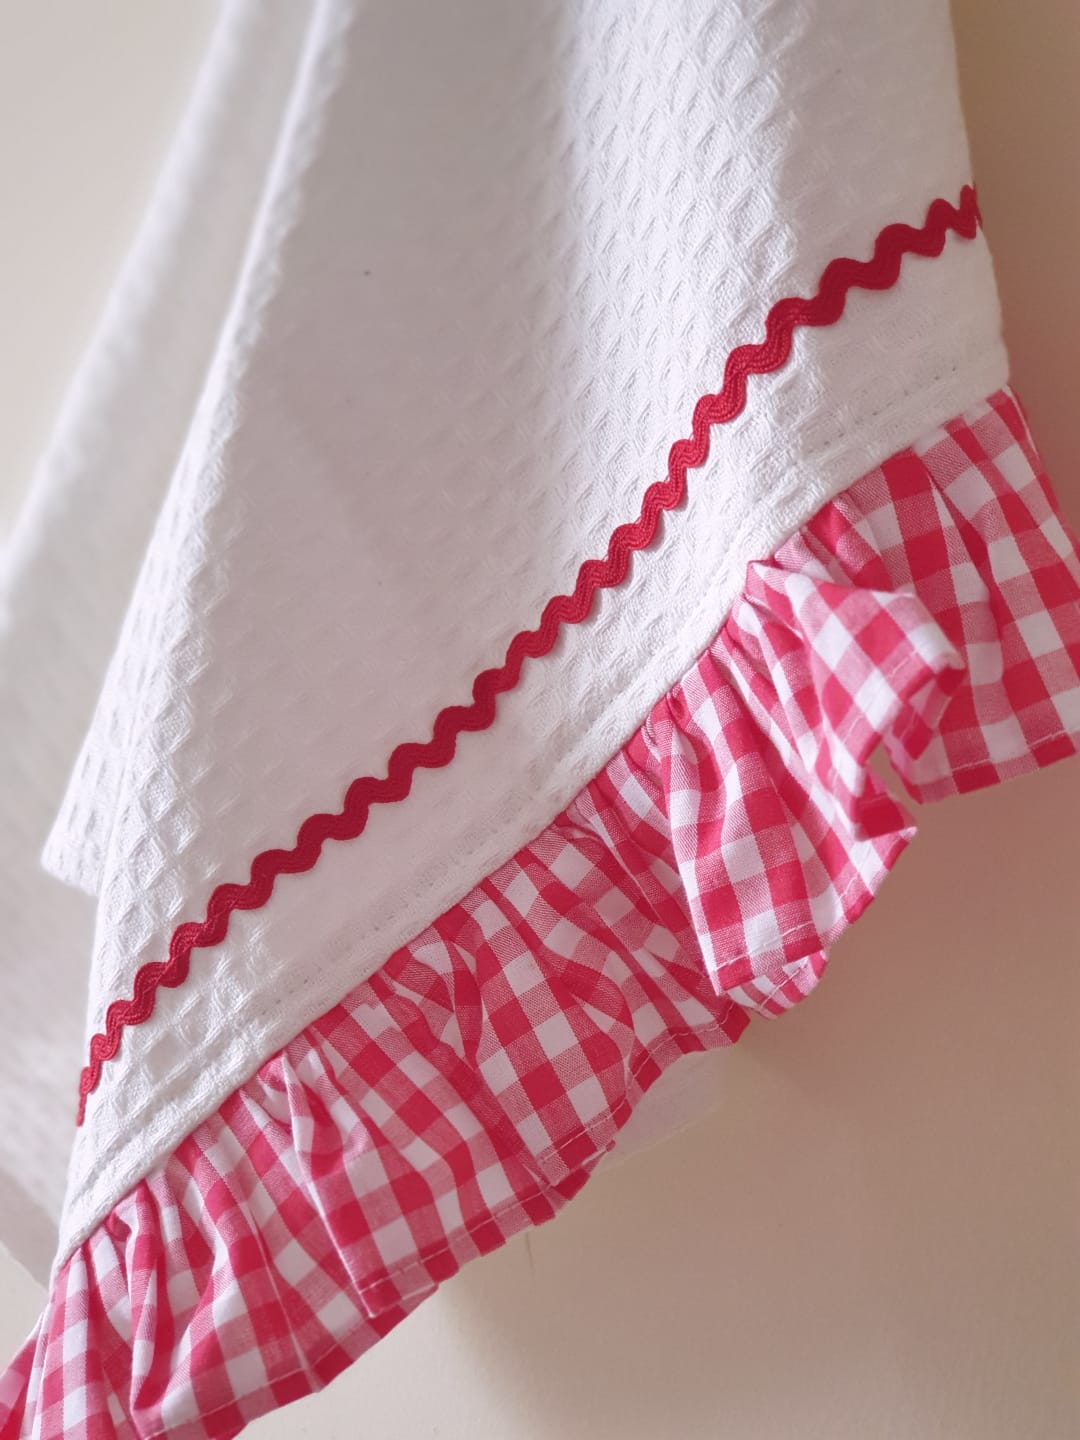 Kitchen Napkins - with ruffled edges - red and white themed (Size: 19